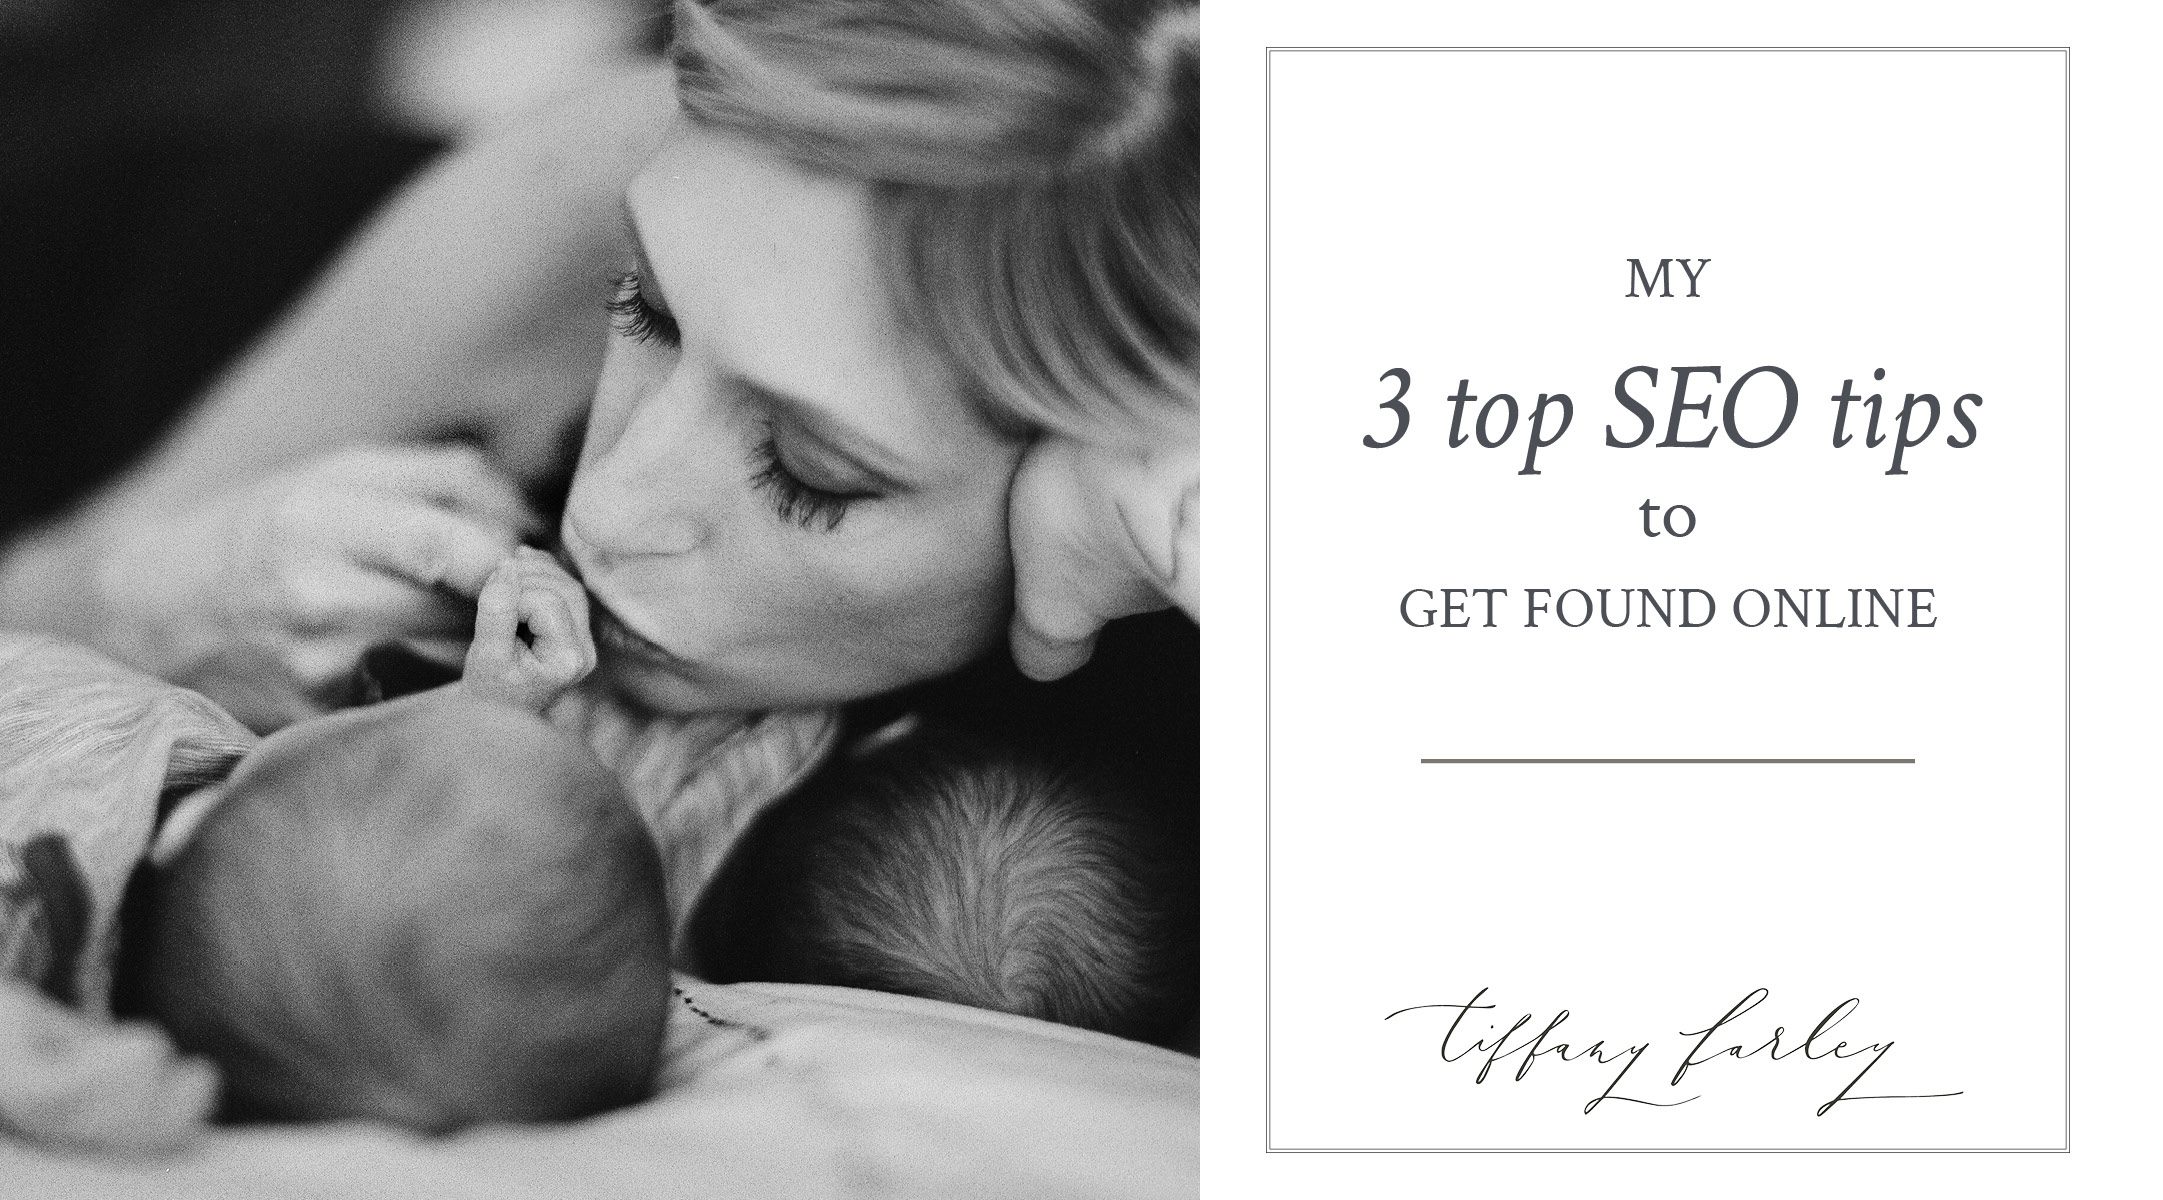 Maine Maternity and Newborn Photographer Tiffany Farley shares top SEO tips for getting your business found online, http://tiffanyfarley.com